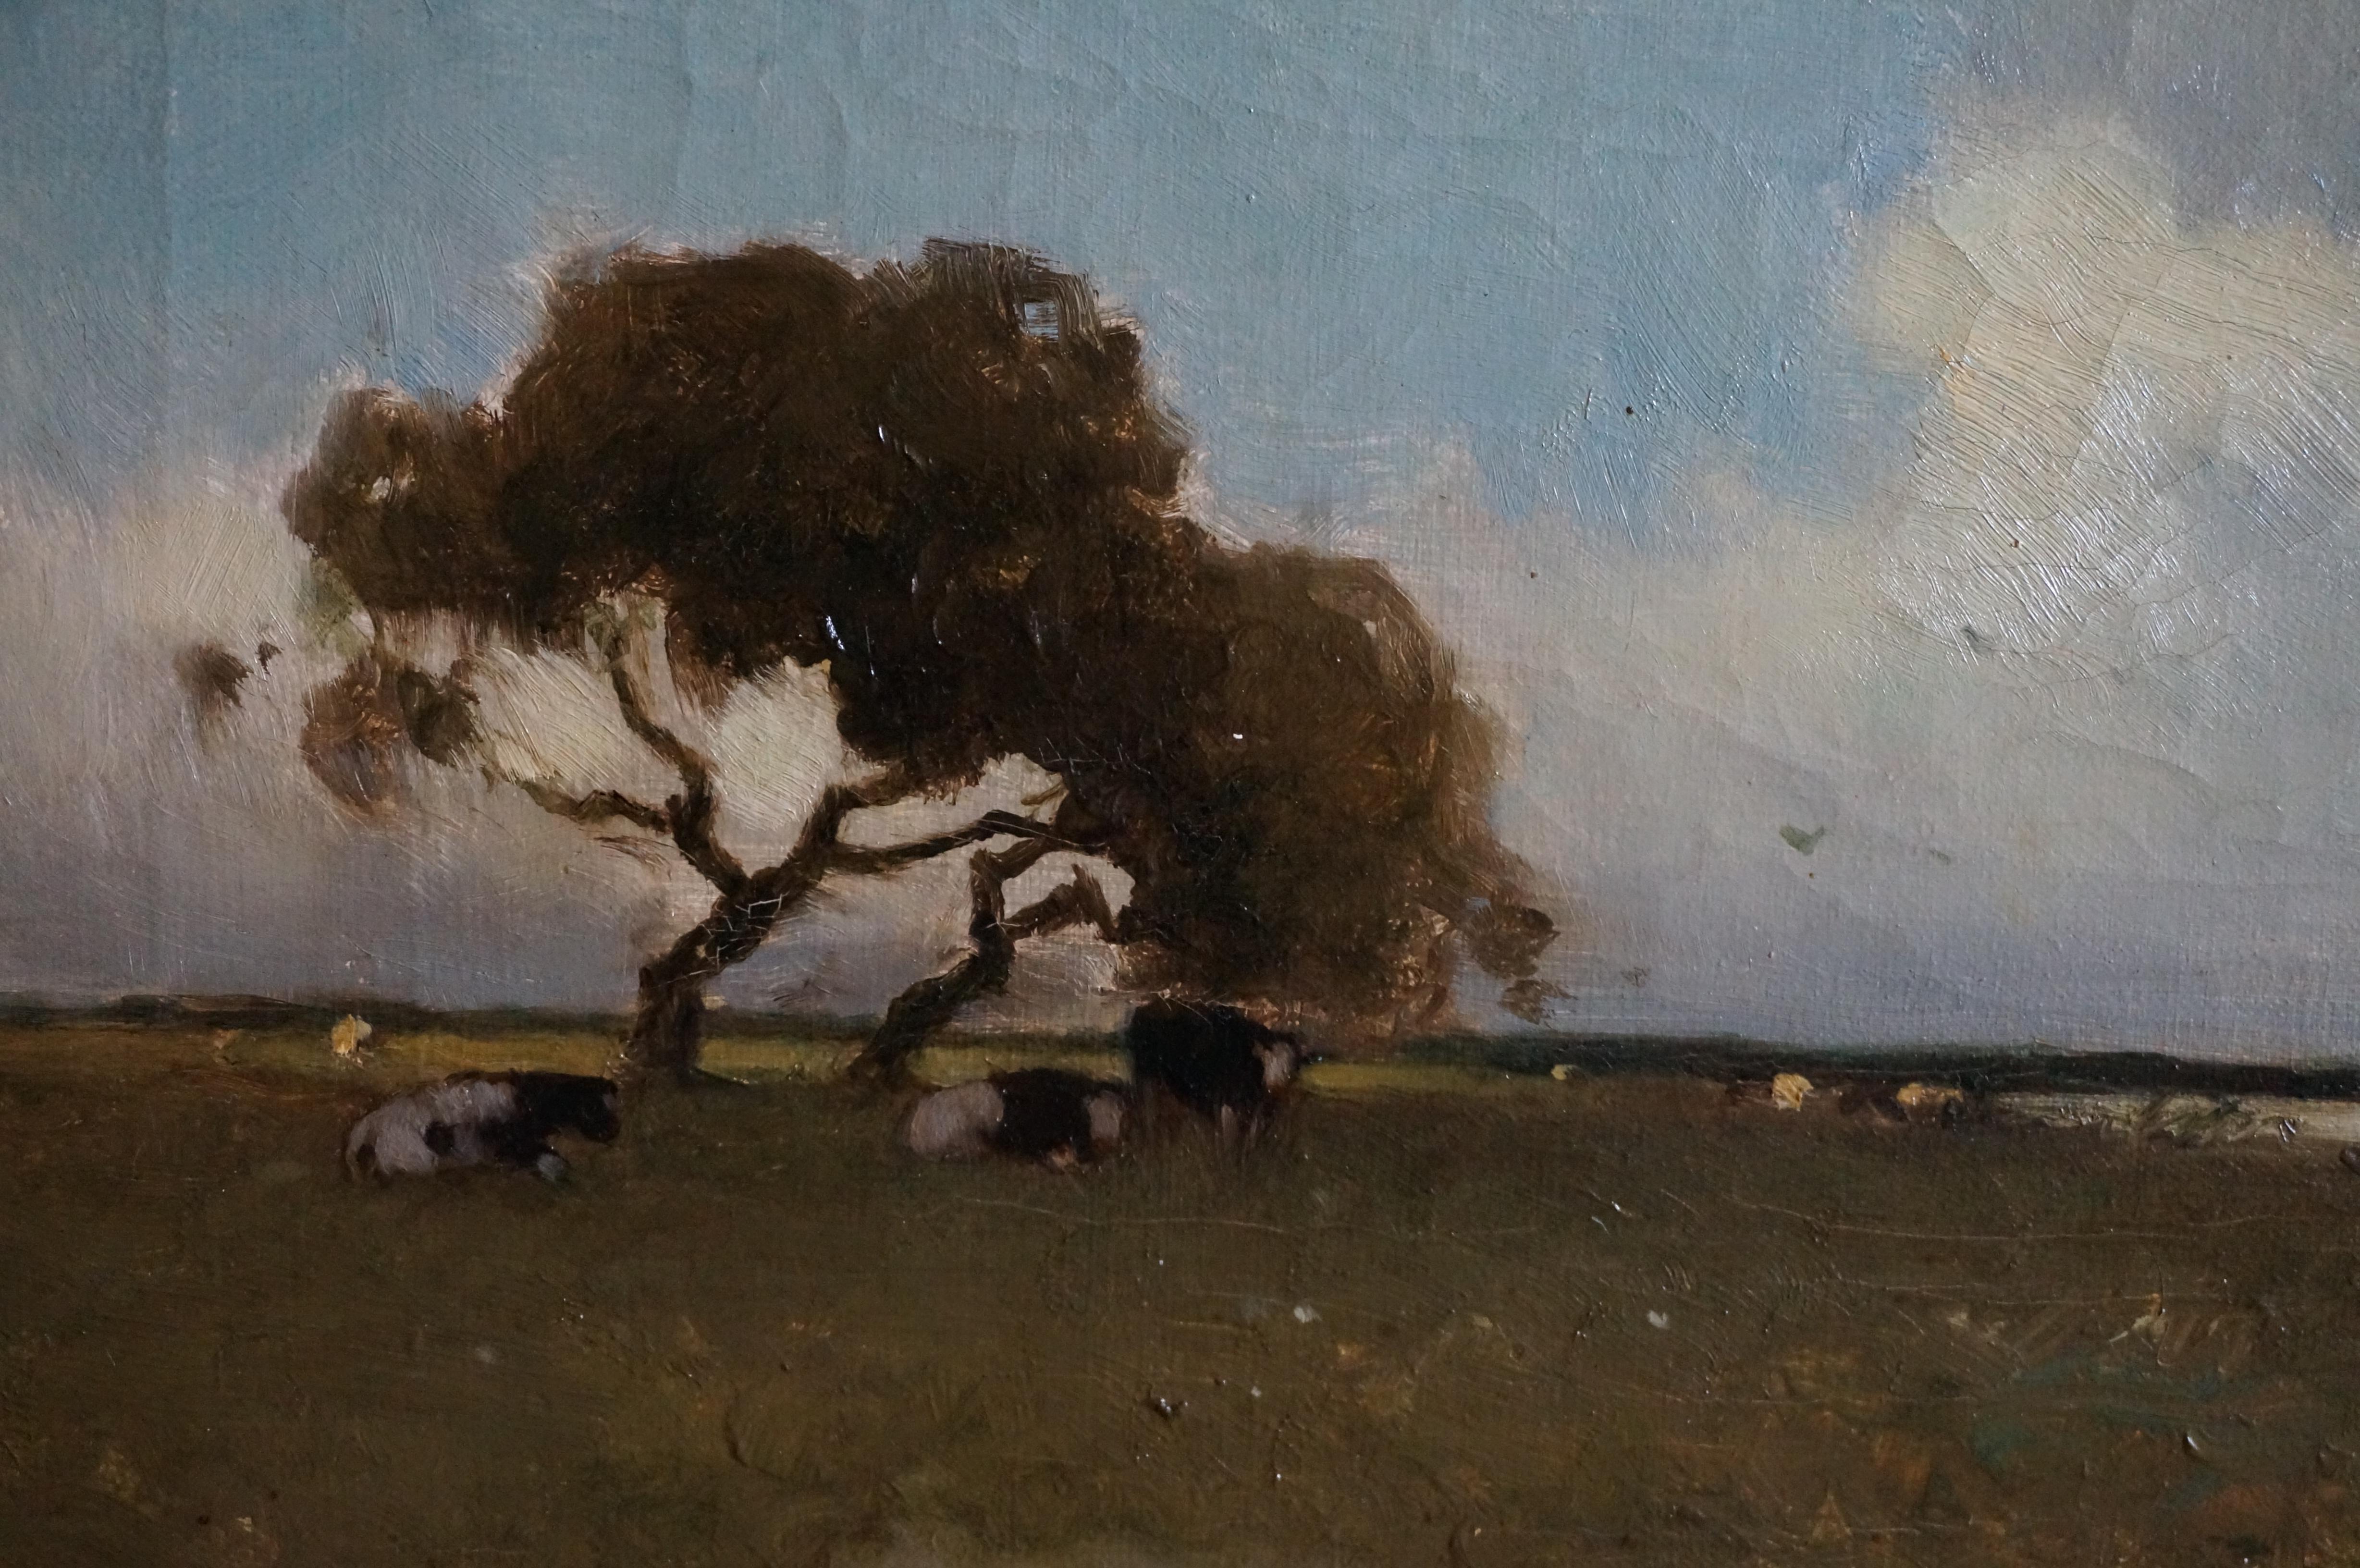 Aris Knikker (1887 - 19662)
Dutch landscape with cows resting underneath a tree and windmill on the horizon
Signed lower right A. Knikker
Oil on canvas
Dimensions excl. frame: 29.5 x 42 cm.
Dimensions incl. frame: 57 x 69 cm.

In fair condition,